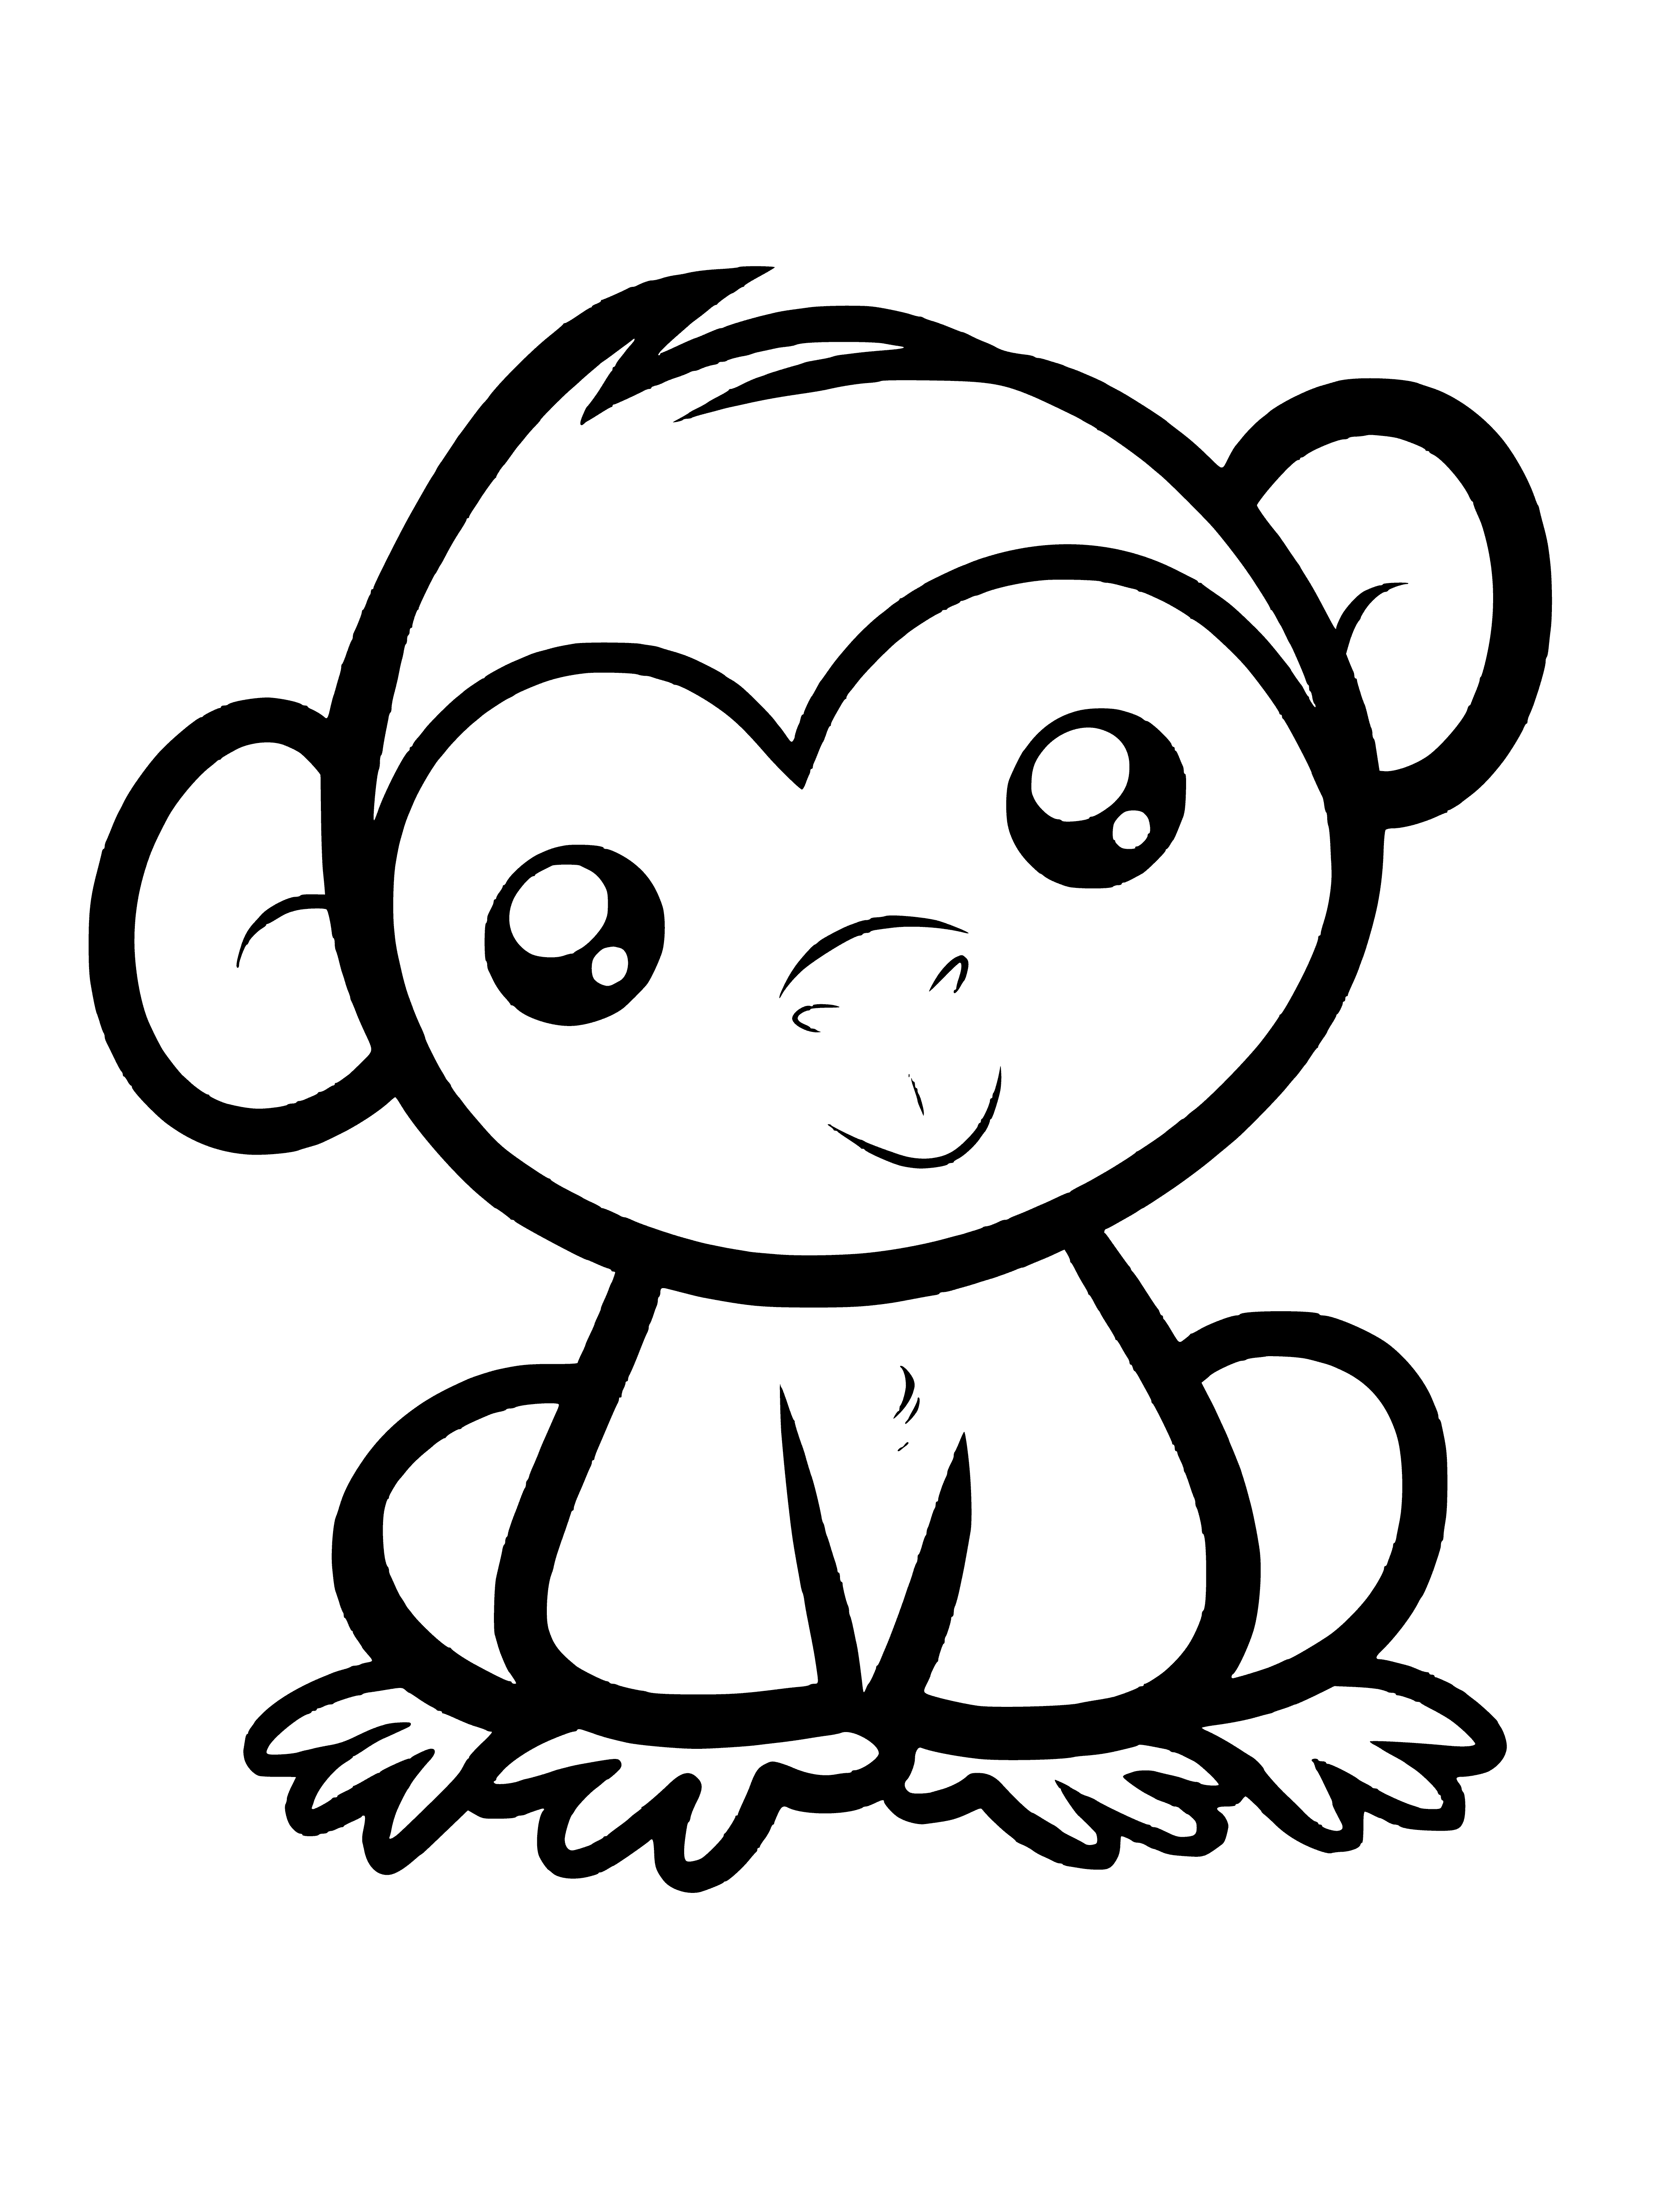 coloring page: Five small monkeys, different colors, three on branch, one hanging and one climbing tree.